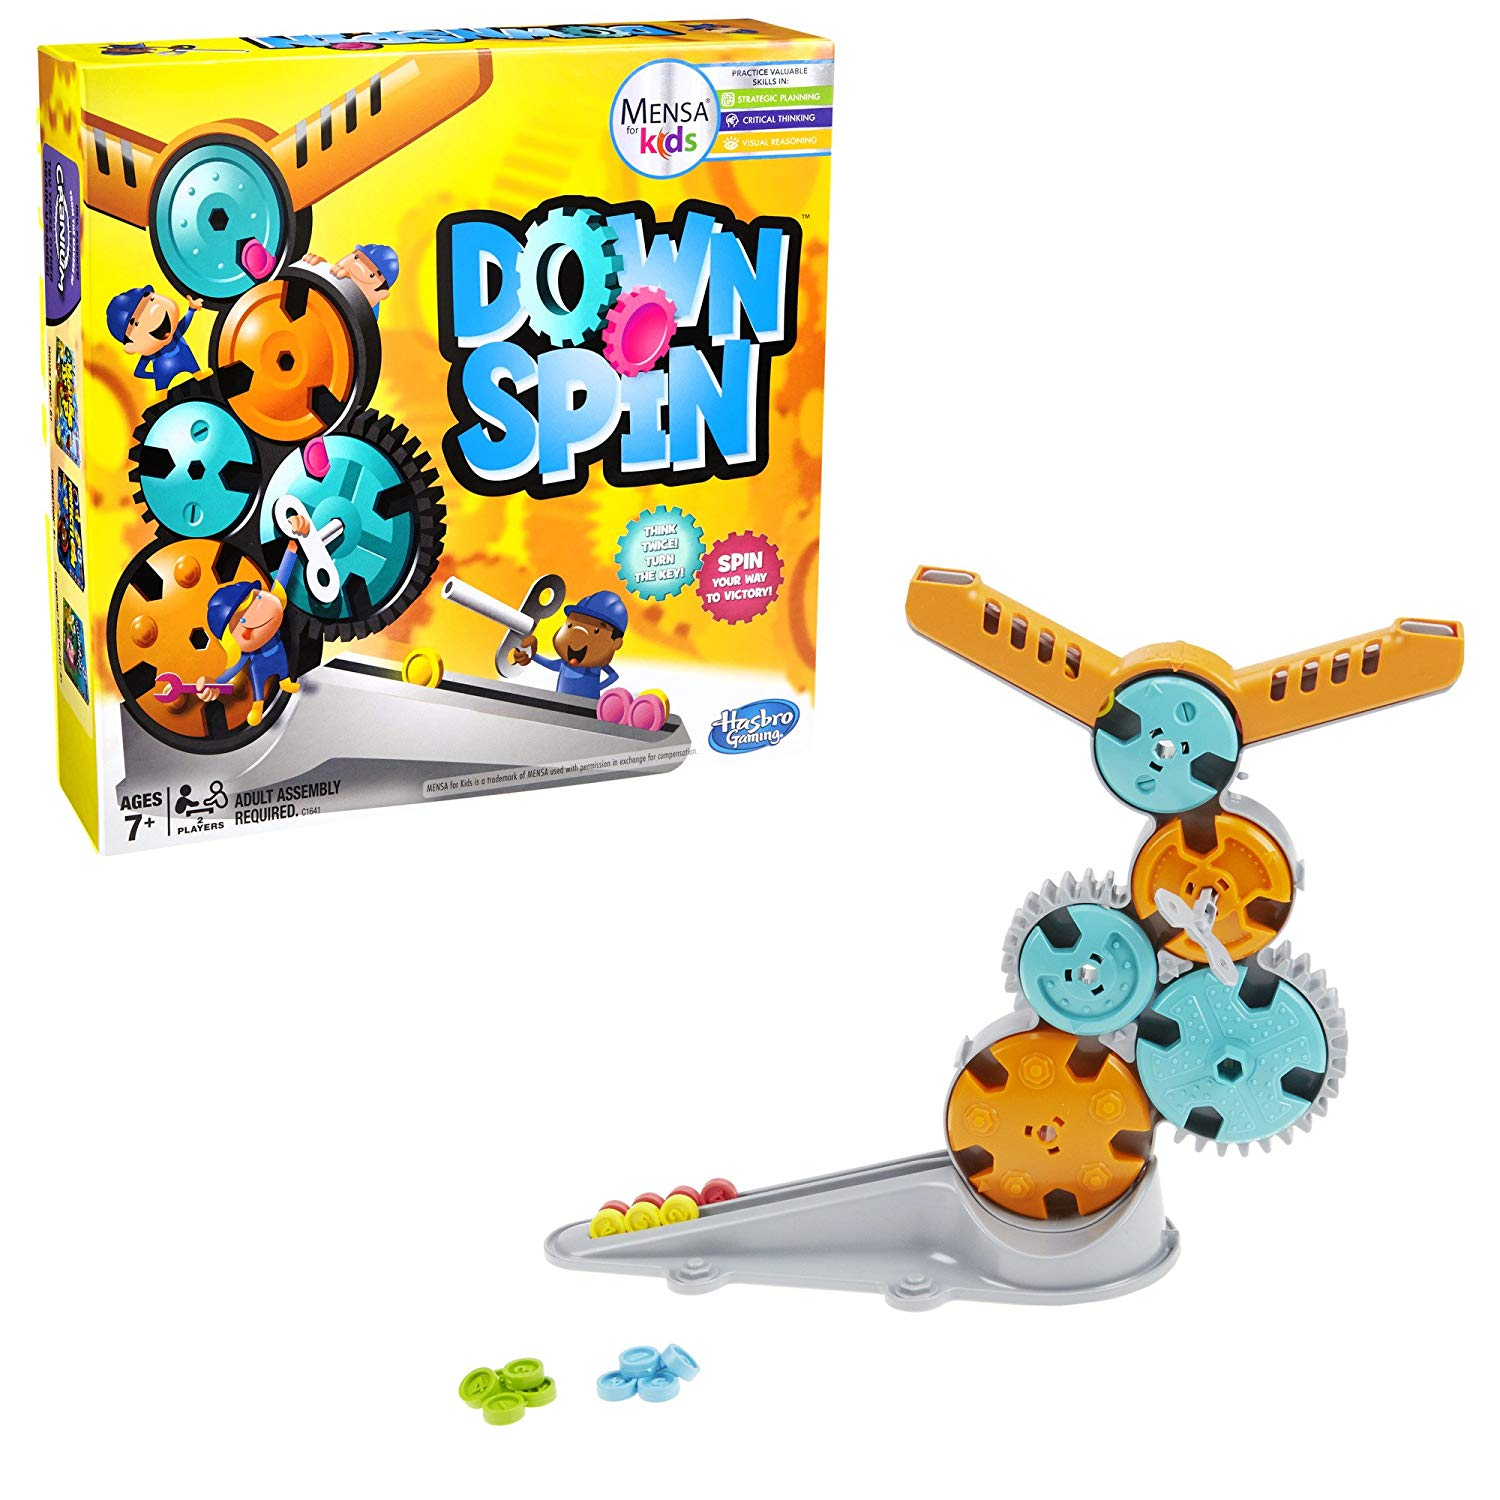 Hasbro Downspin Game Only $8.99! (Reg $19.99)